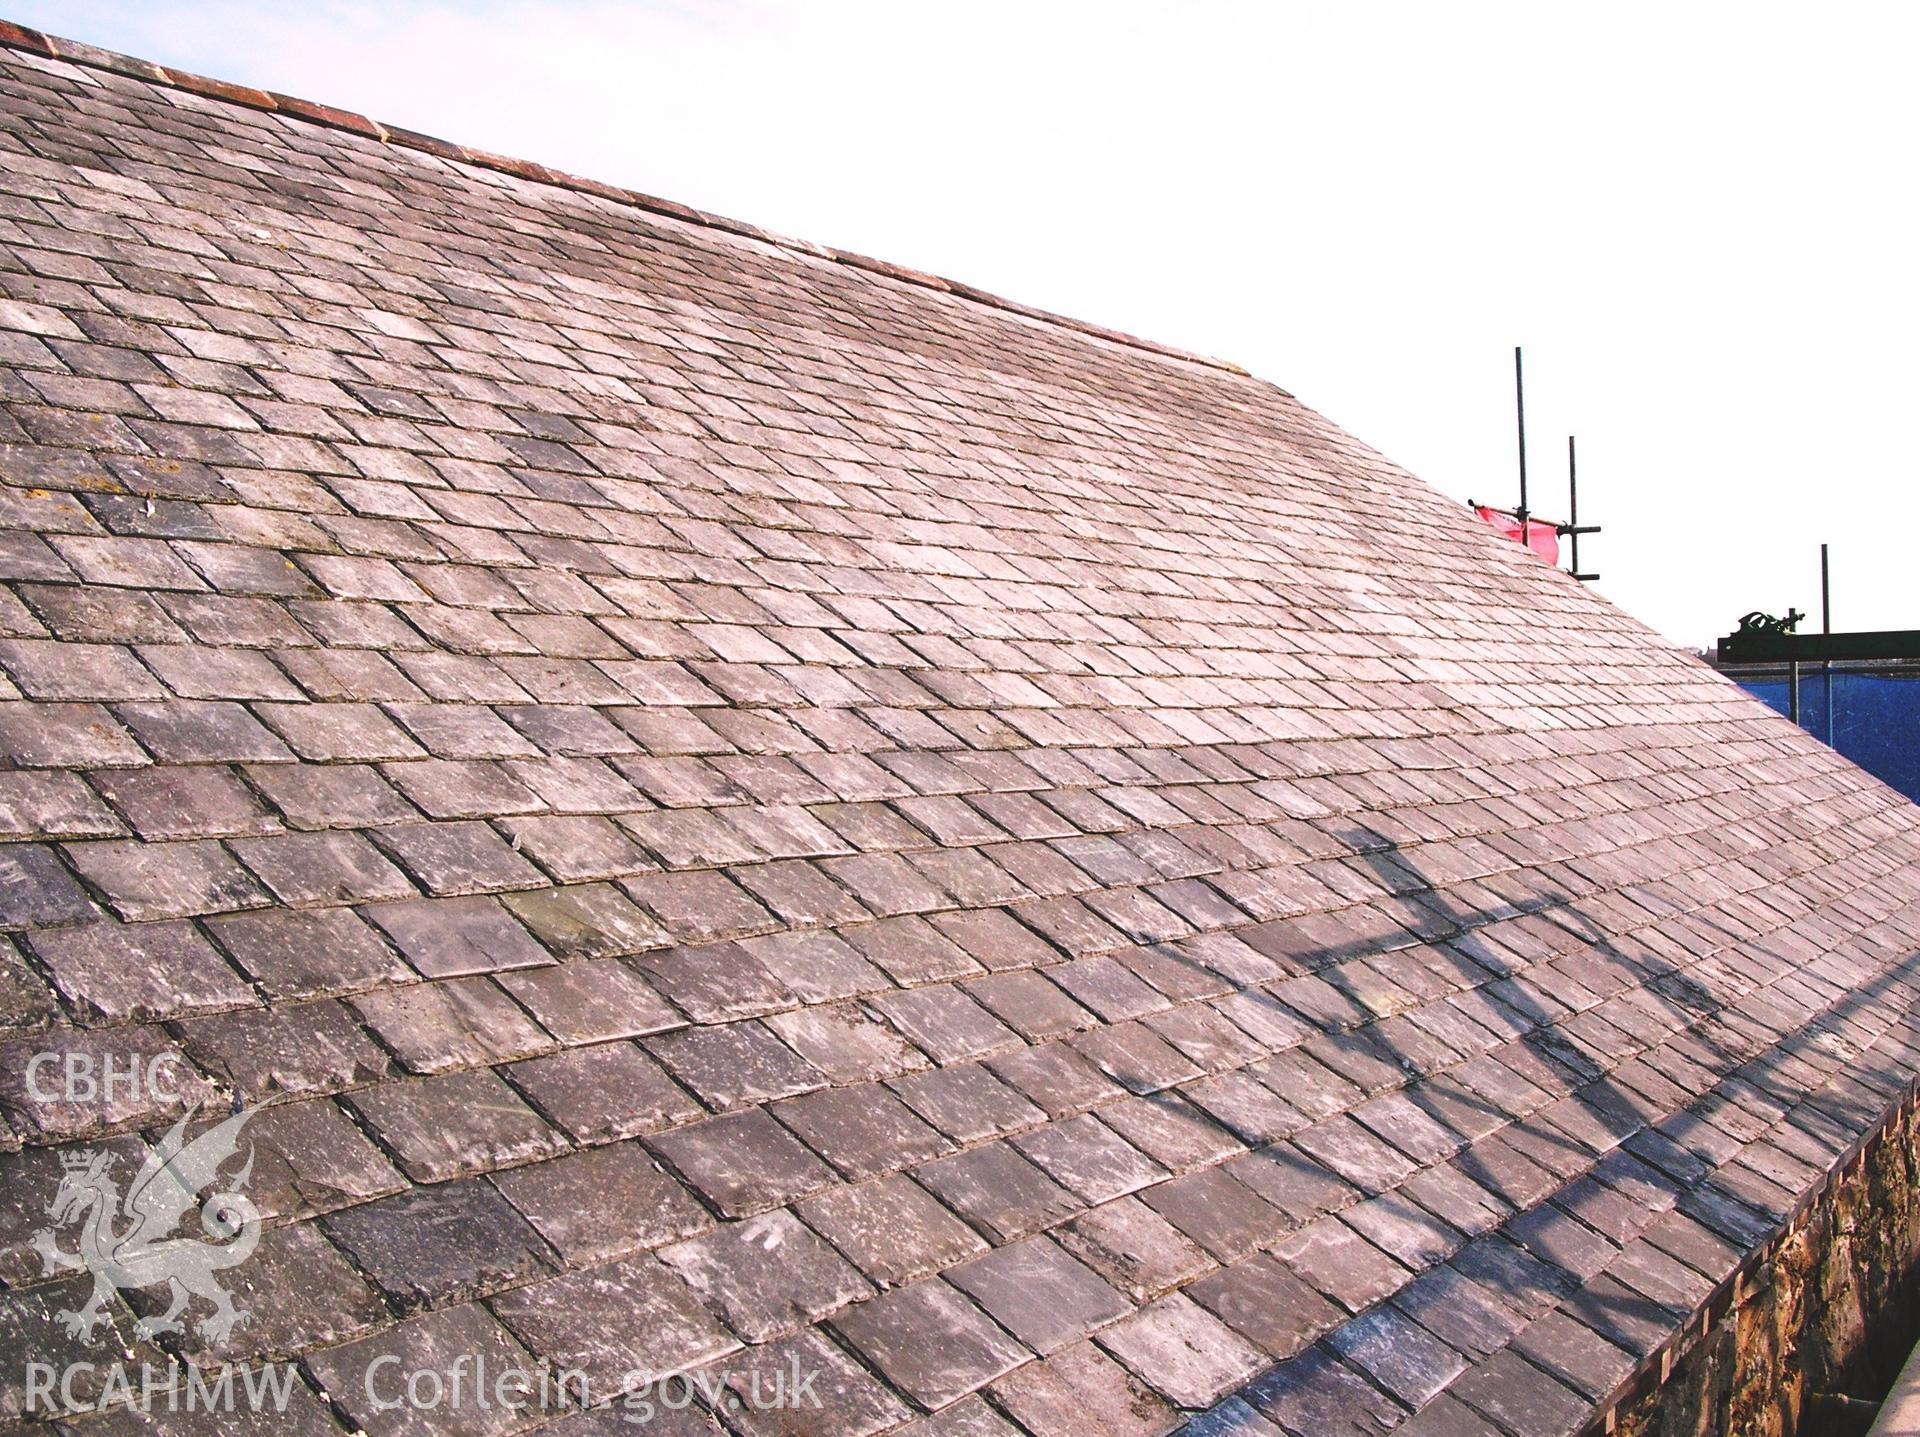 Colour photo showing restored roof (west) at the Clive Engine House, Talar Goch Mine, produced by C.J. Williams, 2012.